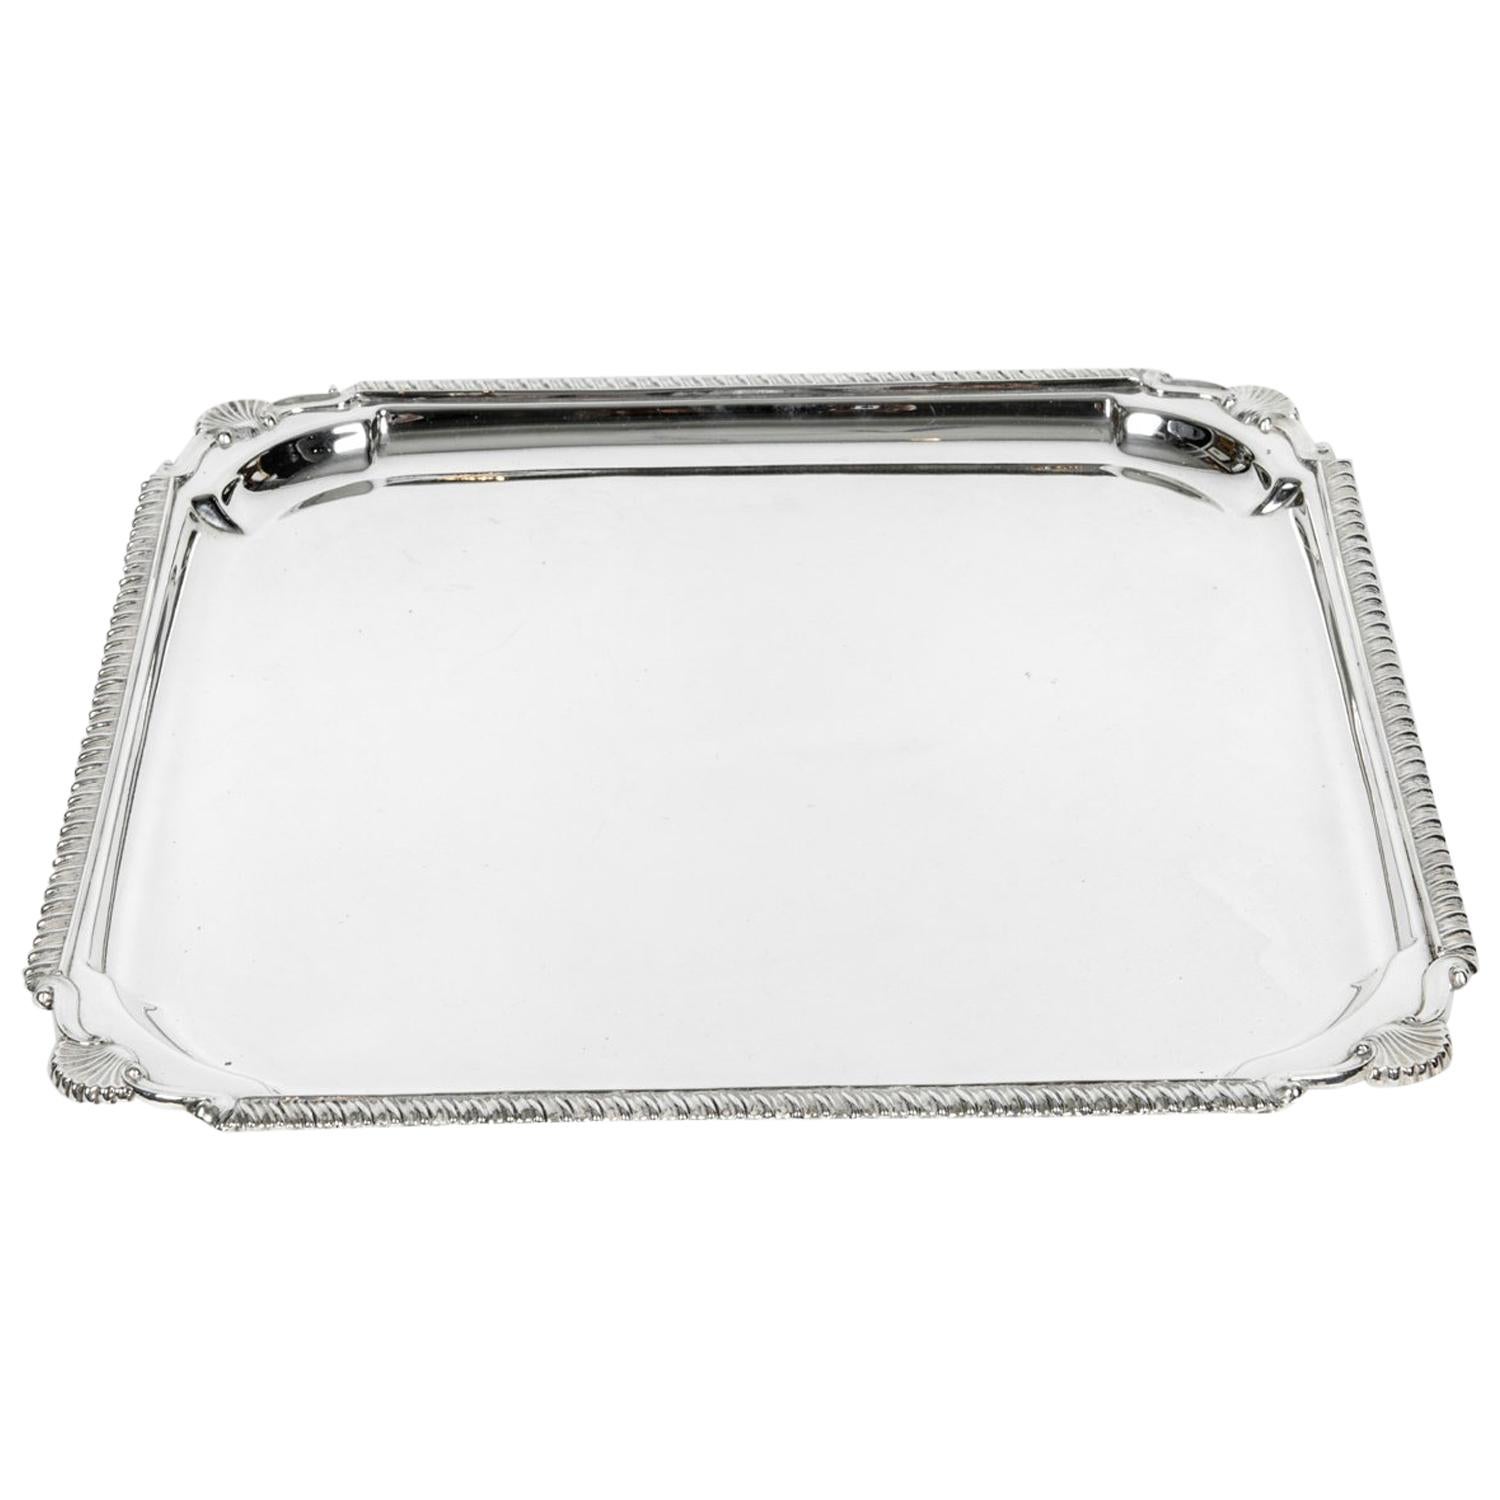 English Silver Plate Barware / Serving Footed Tray